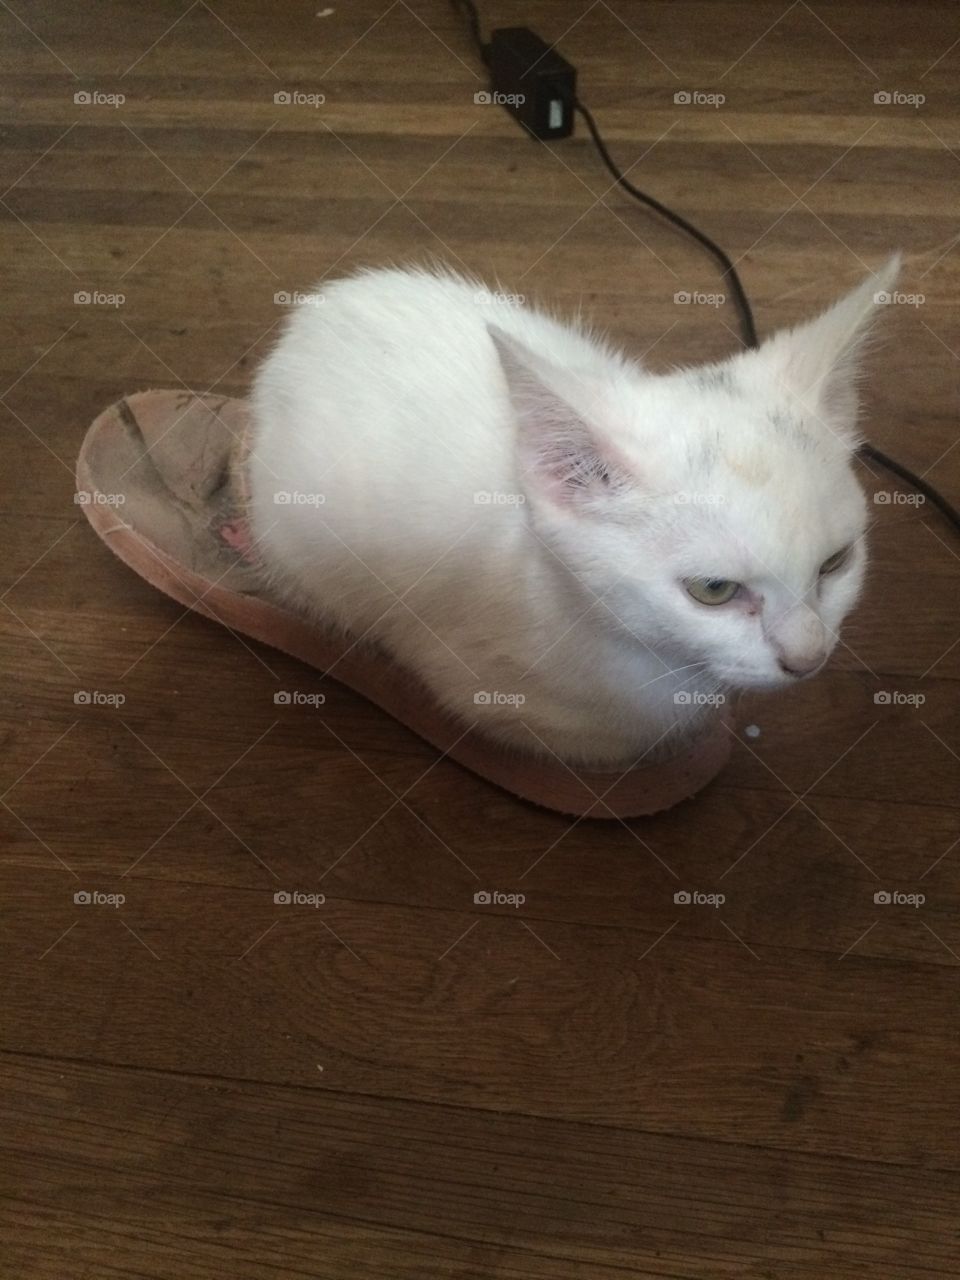 Handsome kitty sitting in a shoe. 